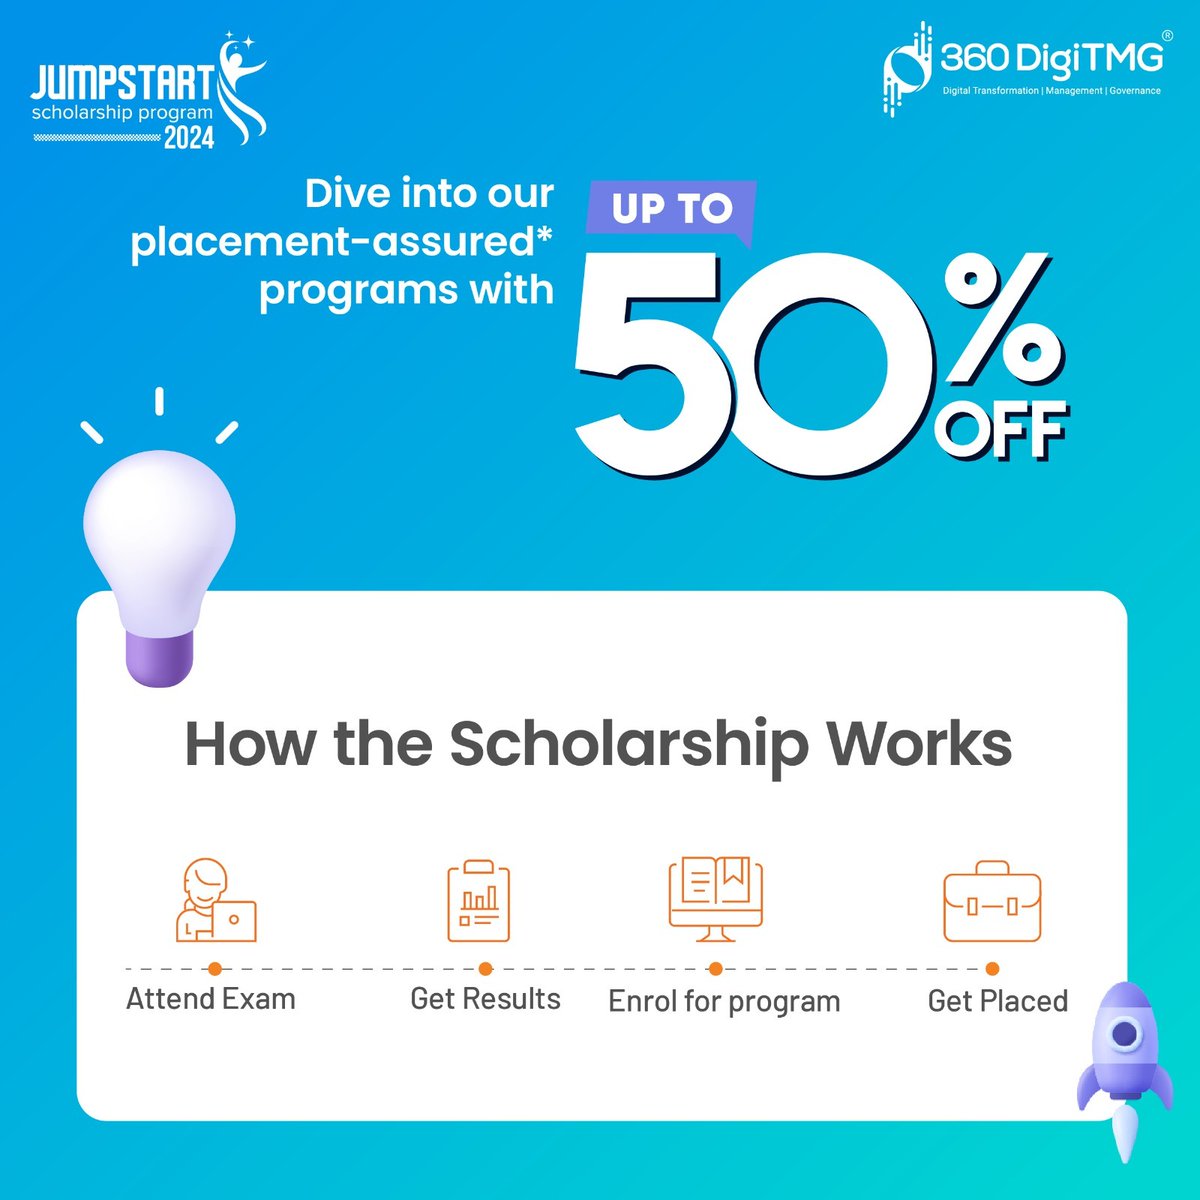 📢 Attention all graduates and working professionals!🎓✨ 

Limited scholarship from 360DigiTMG! First 1000 applicants get 50% off. Apply now for your chance at success! 🏫💼💰🚀

Apply Now: 360digitmg.com/jumpstart-indi…

#Jumpstart2024 #scholarshipopportunities #360DigiTMG